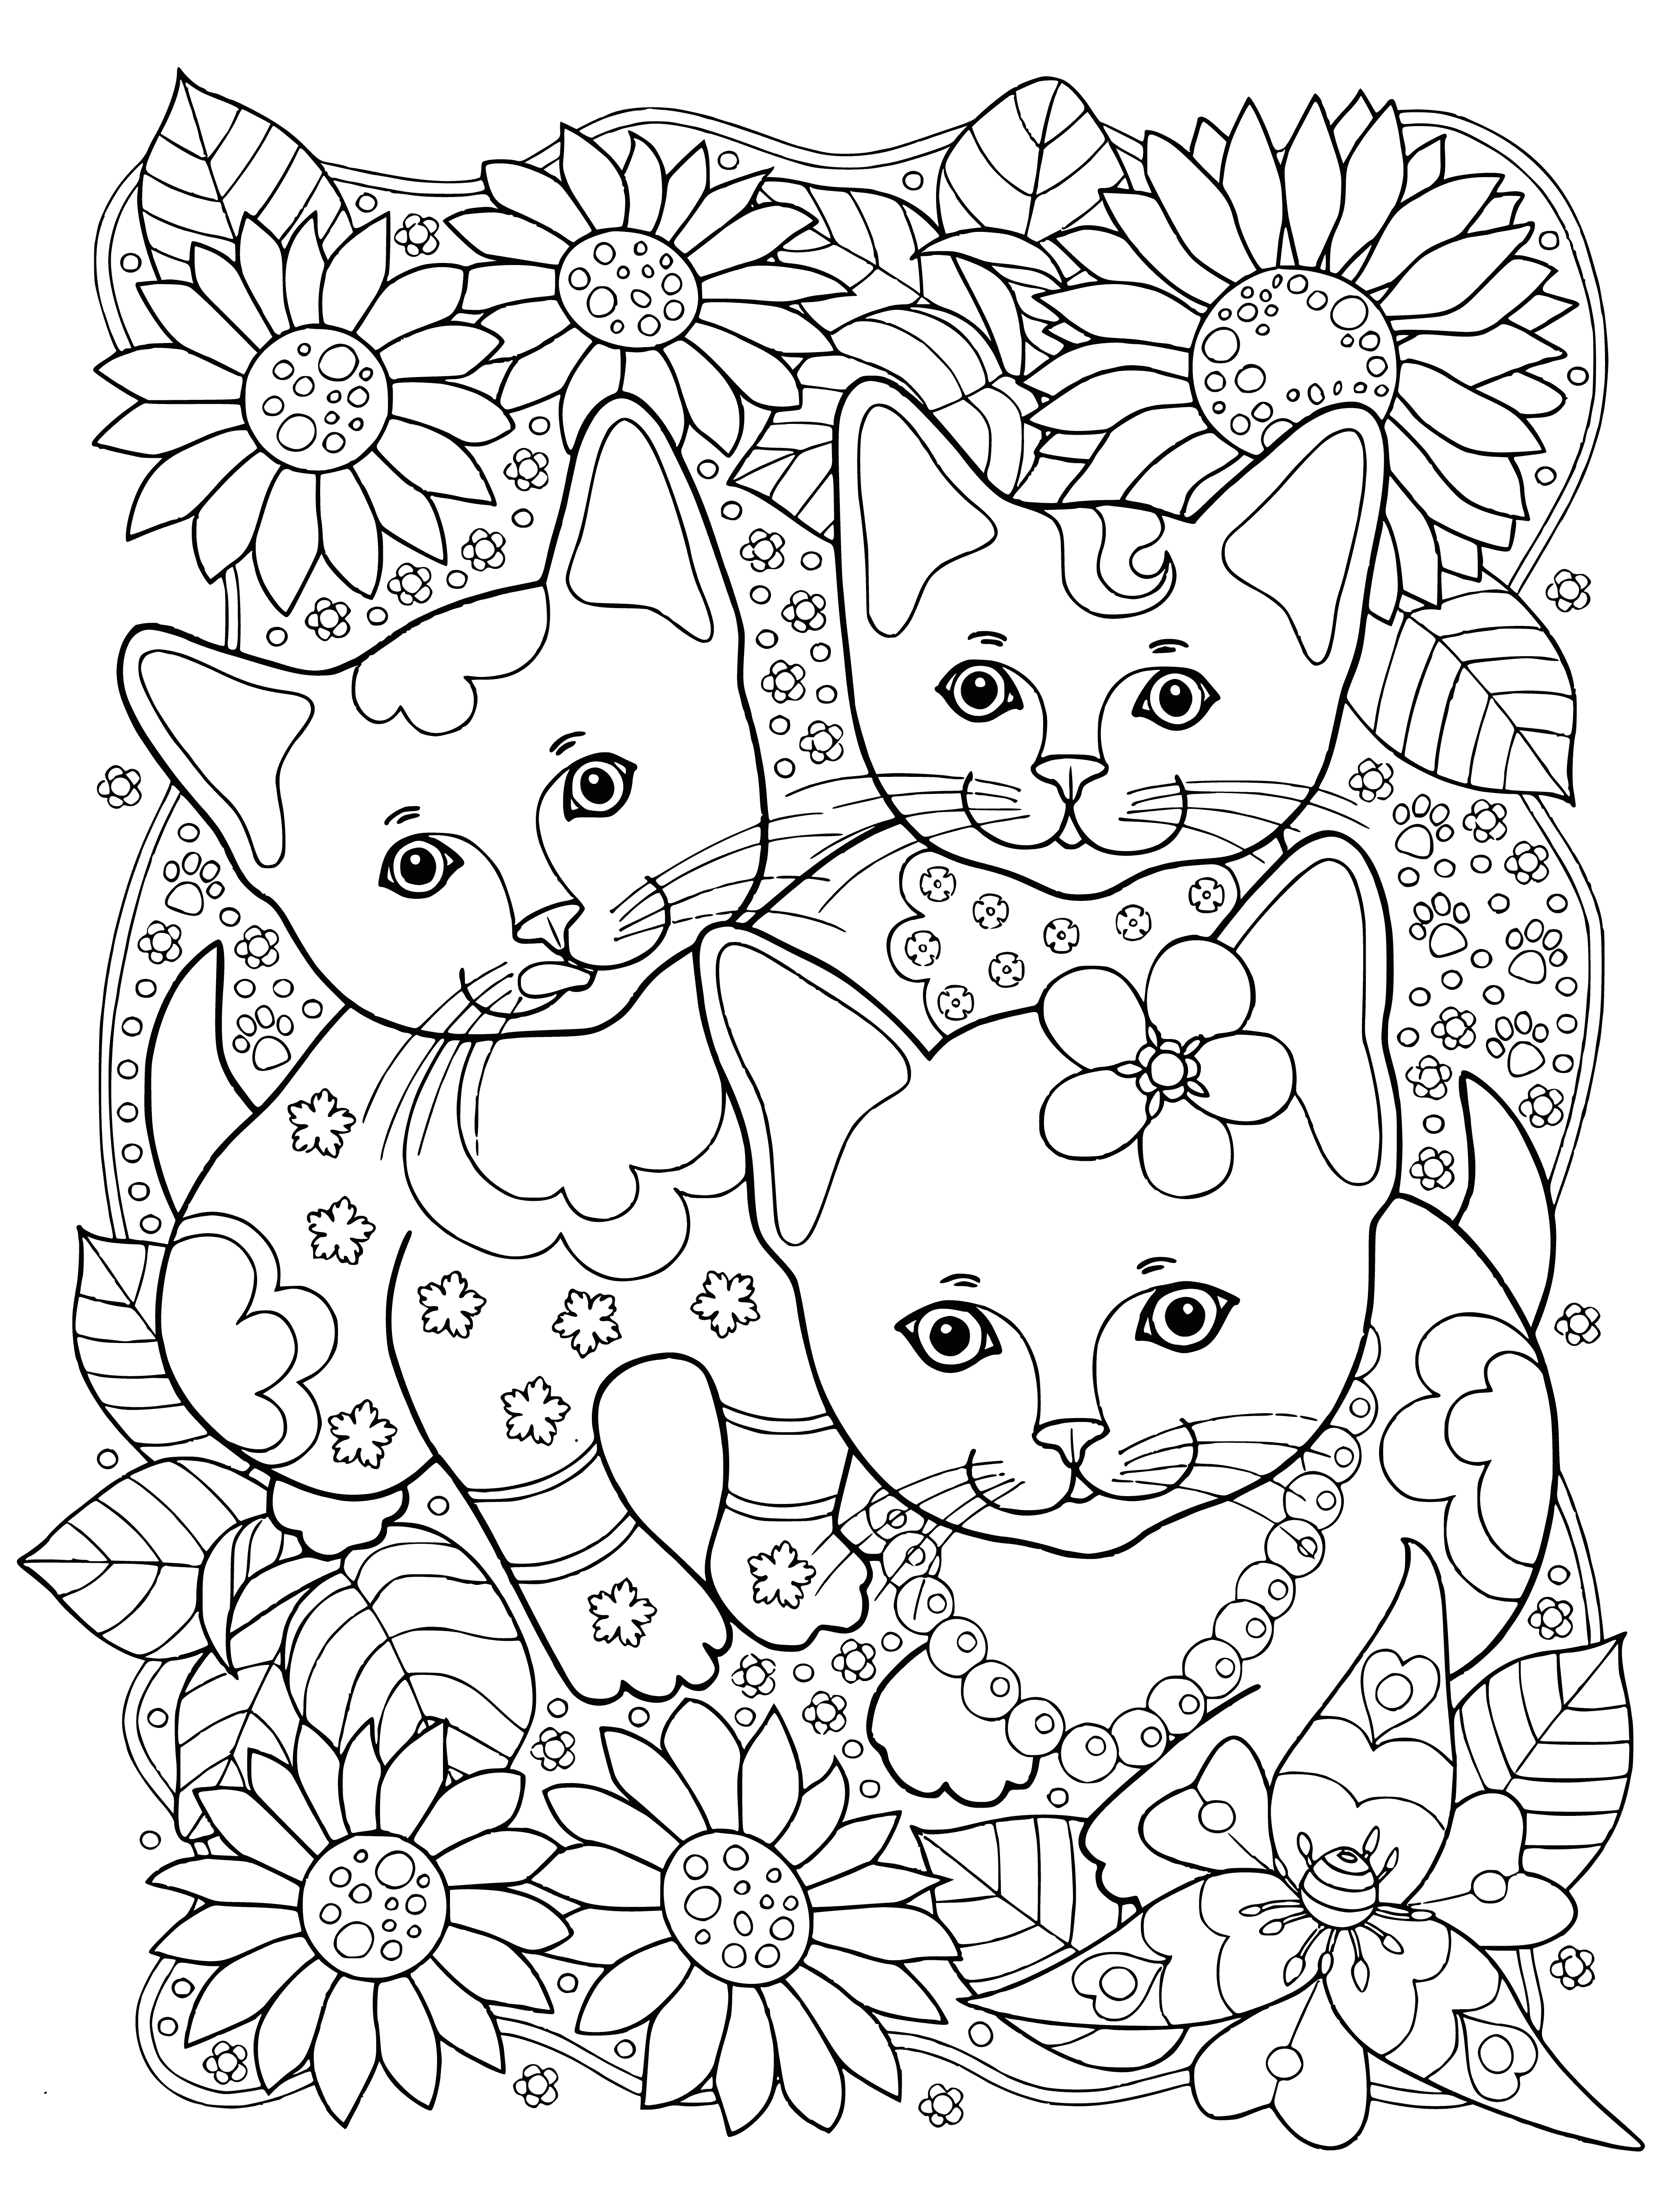 Kittens in the garden coloring page